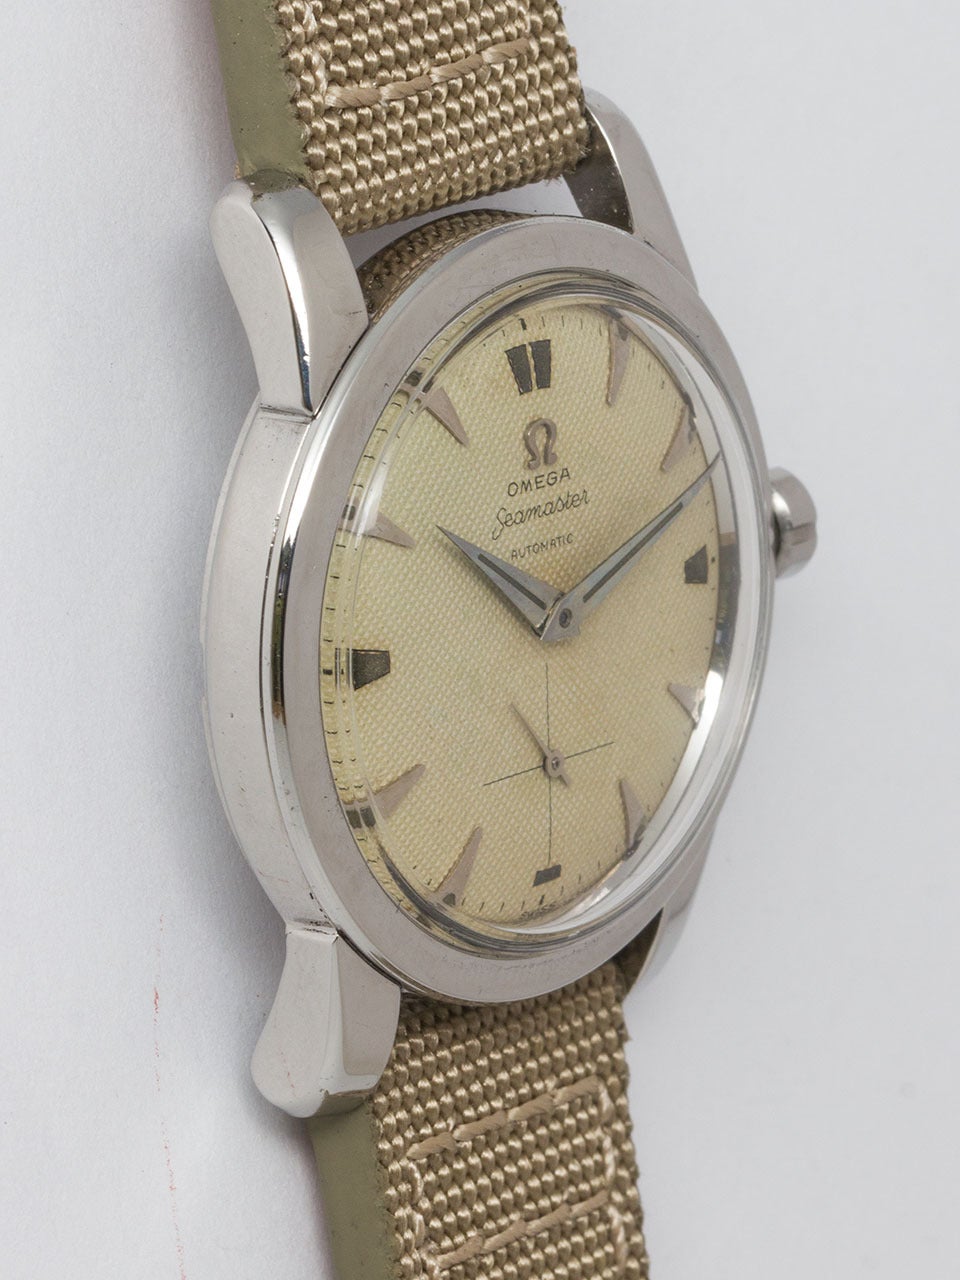 Omega Stainless Steel Seamaster ref C2576-4 movement serial #13.5 million circa 1952. Great looking example 34mm diameter case with wide bezel, wide lugs and acrylic crystal. Great looking original waffle dial with applied eccentric indexes and